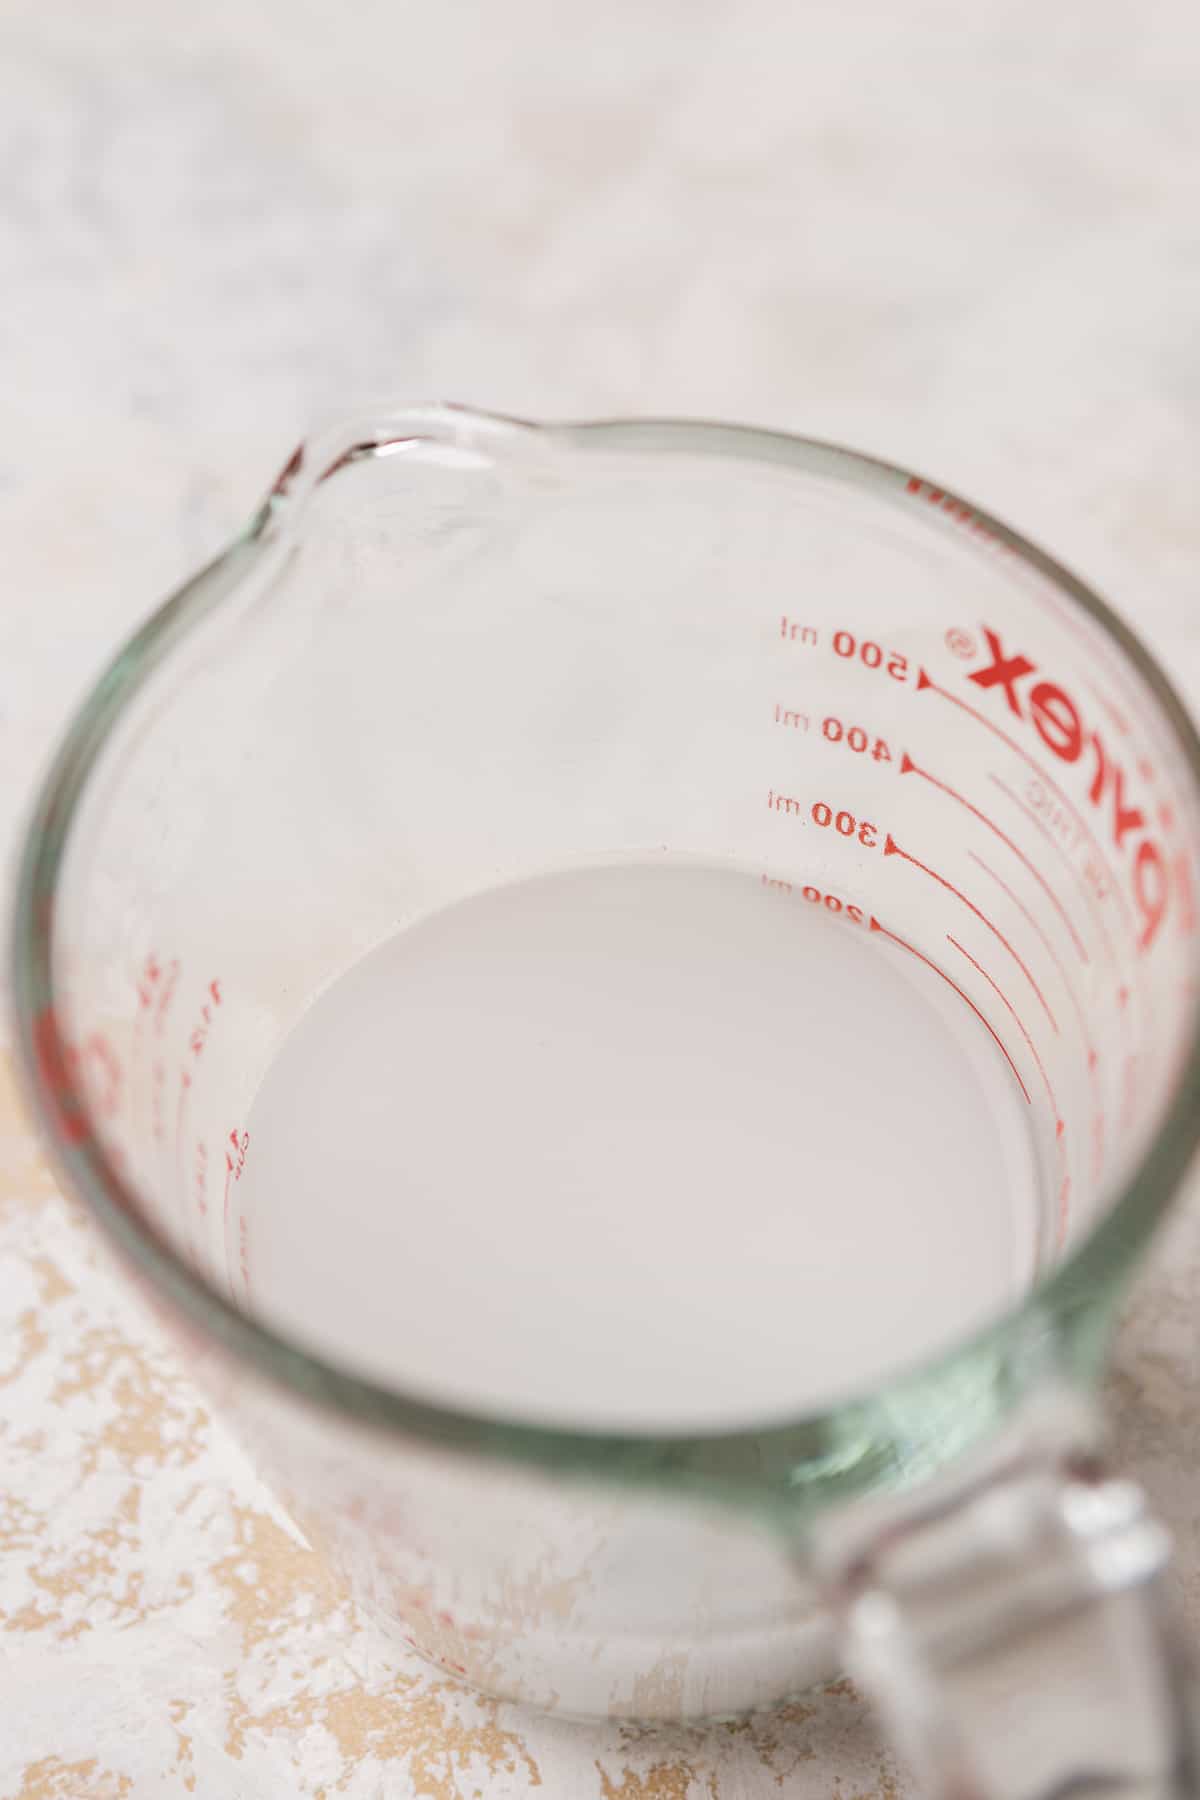 Water and cornstarch mixed together in a measuring cup.